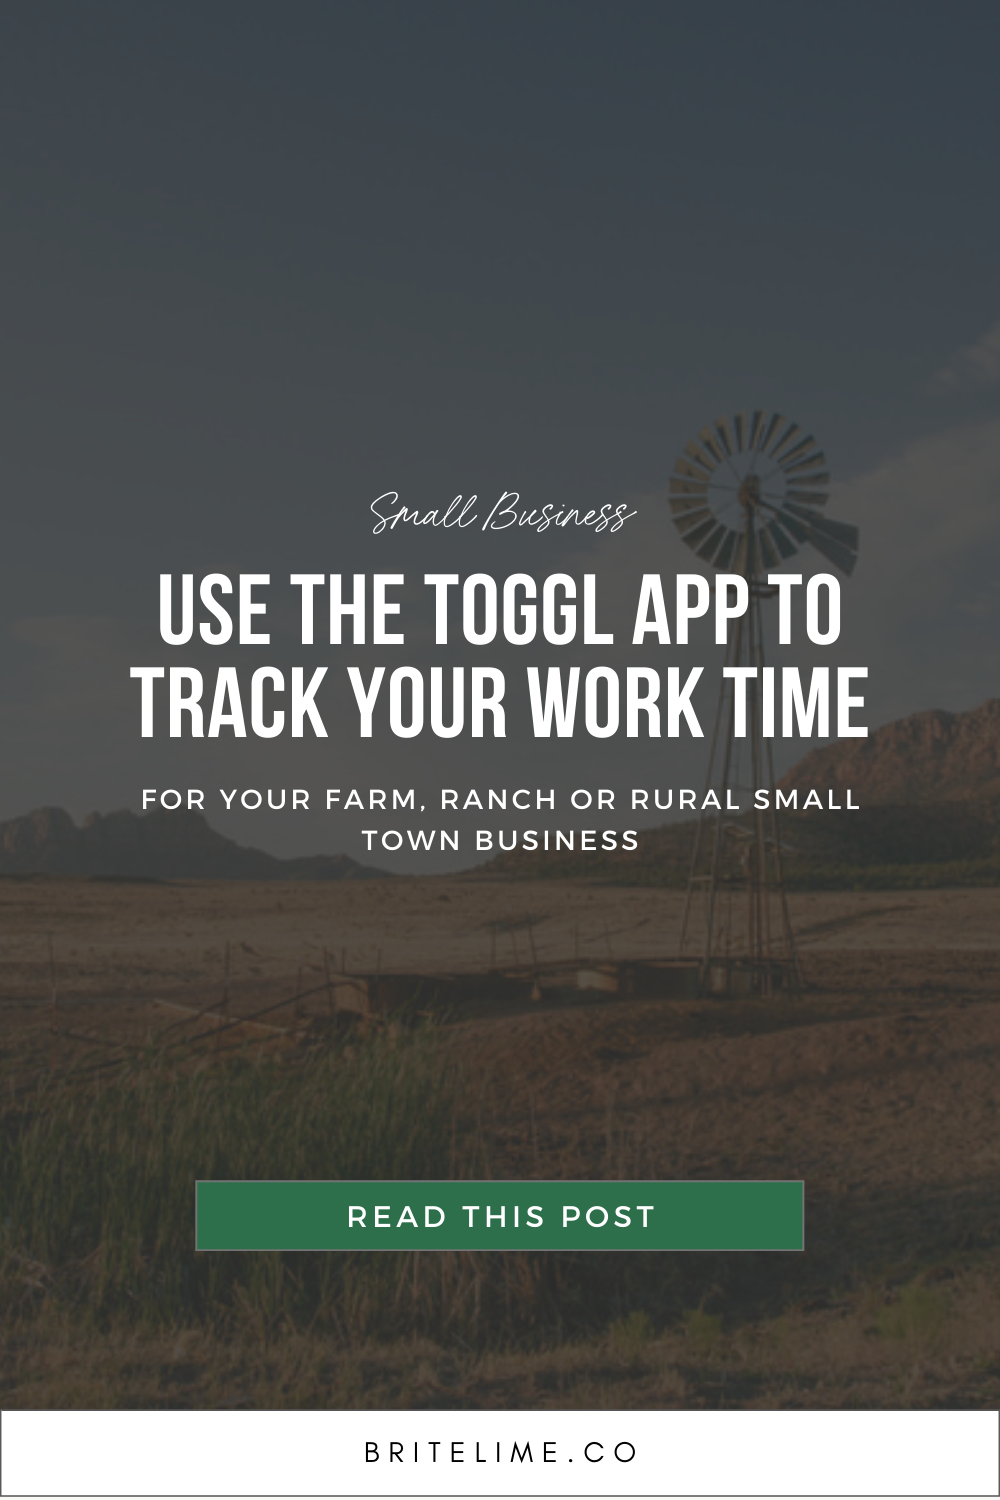 Graphic image: Use the Toggl App to Track Your Work Time for your Farm, Ranch or Rural Small Town Business